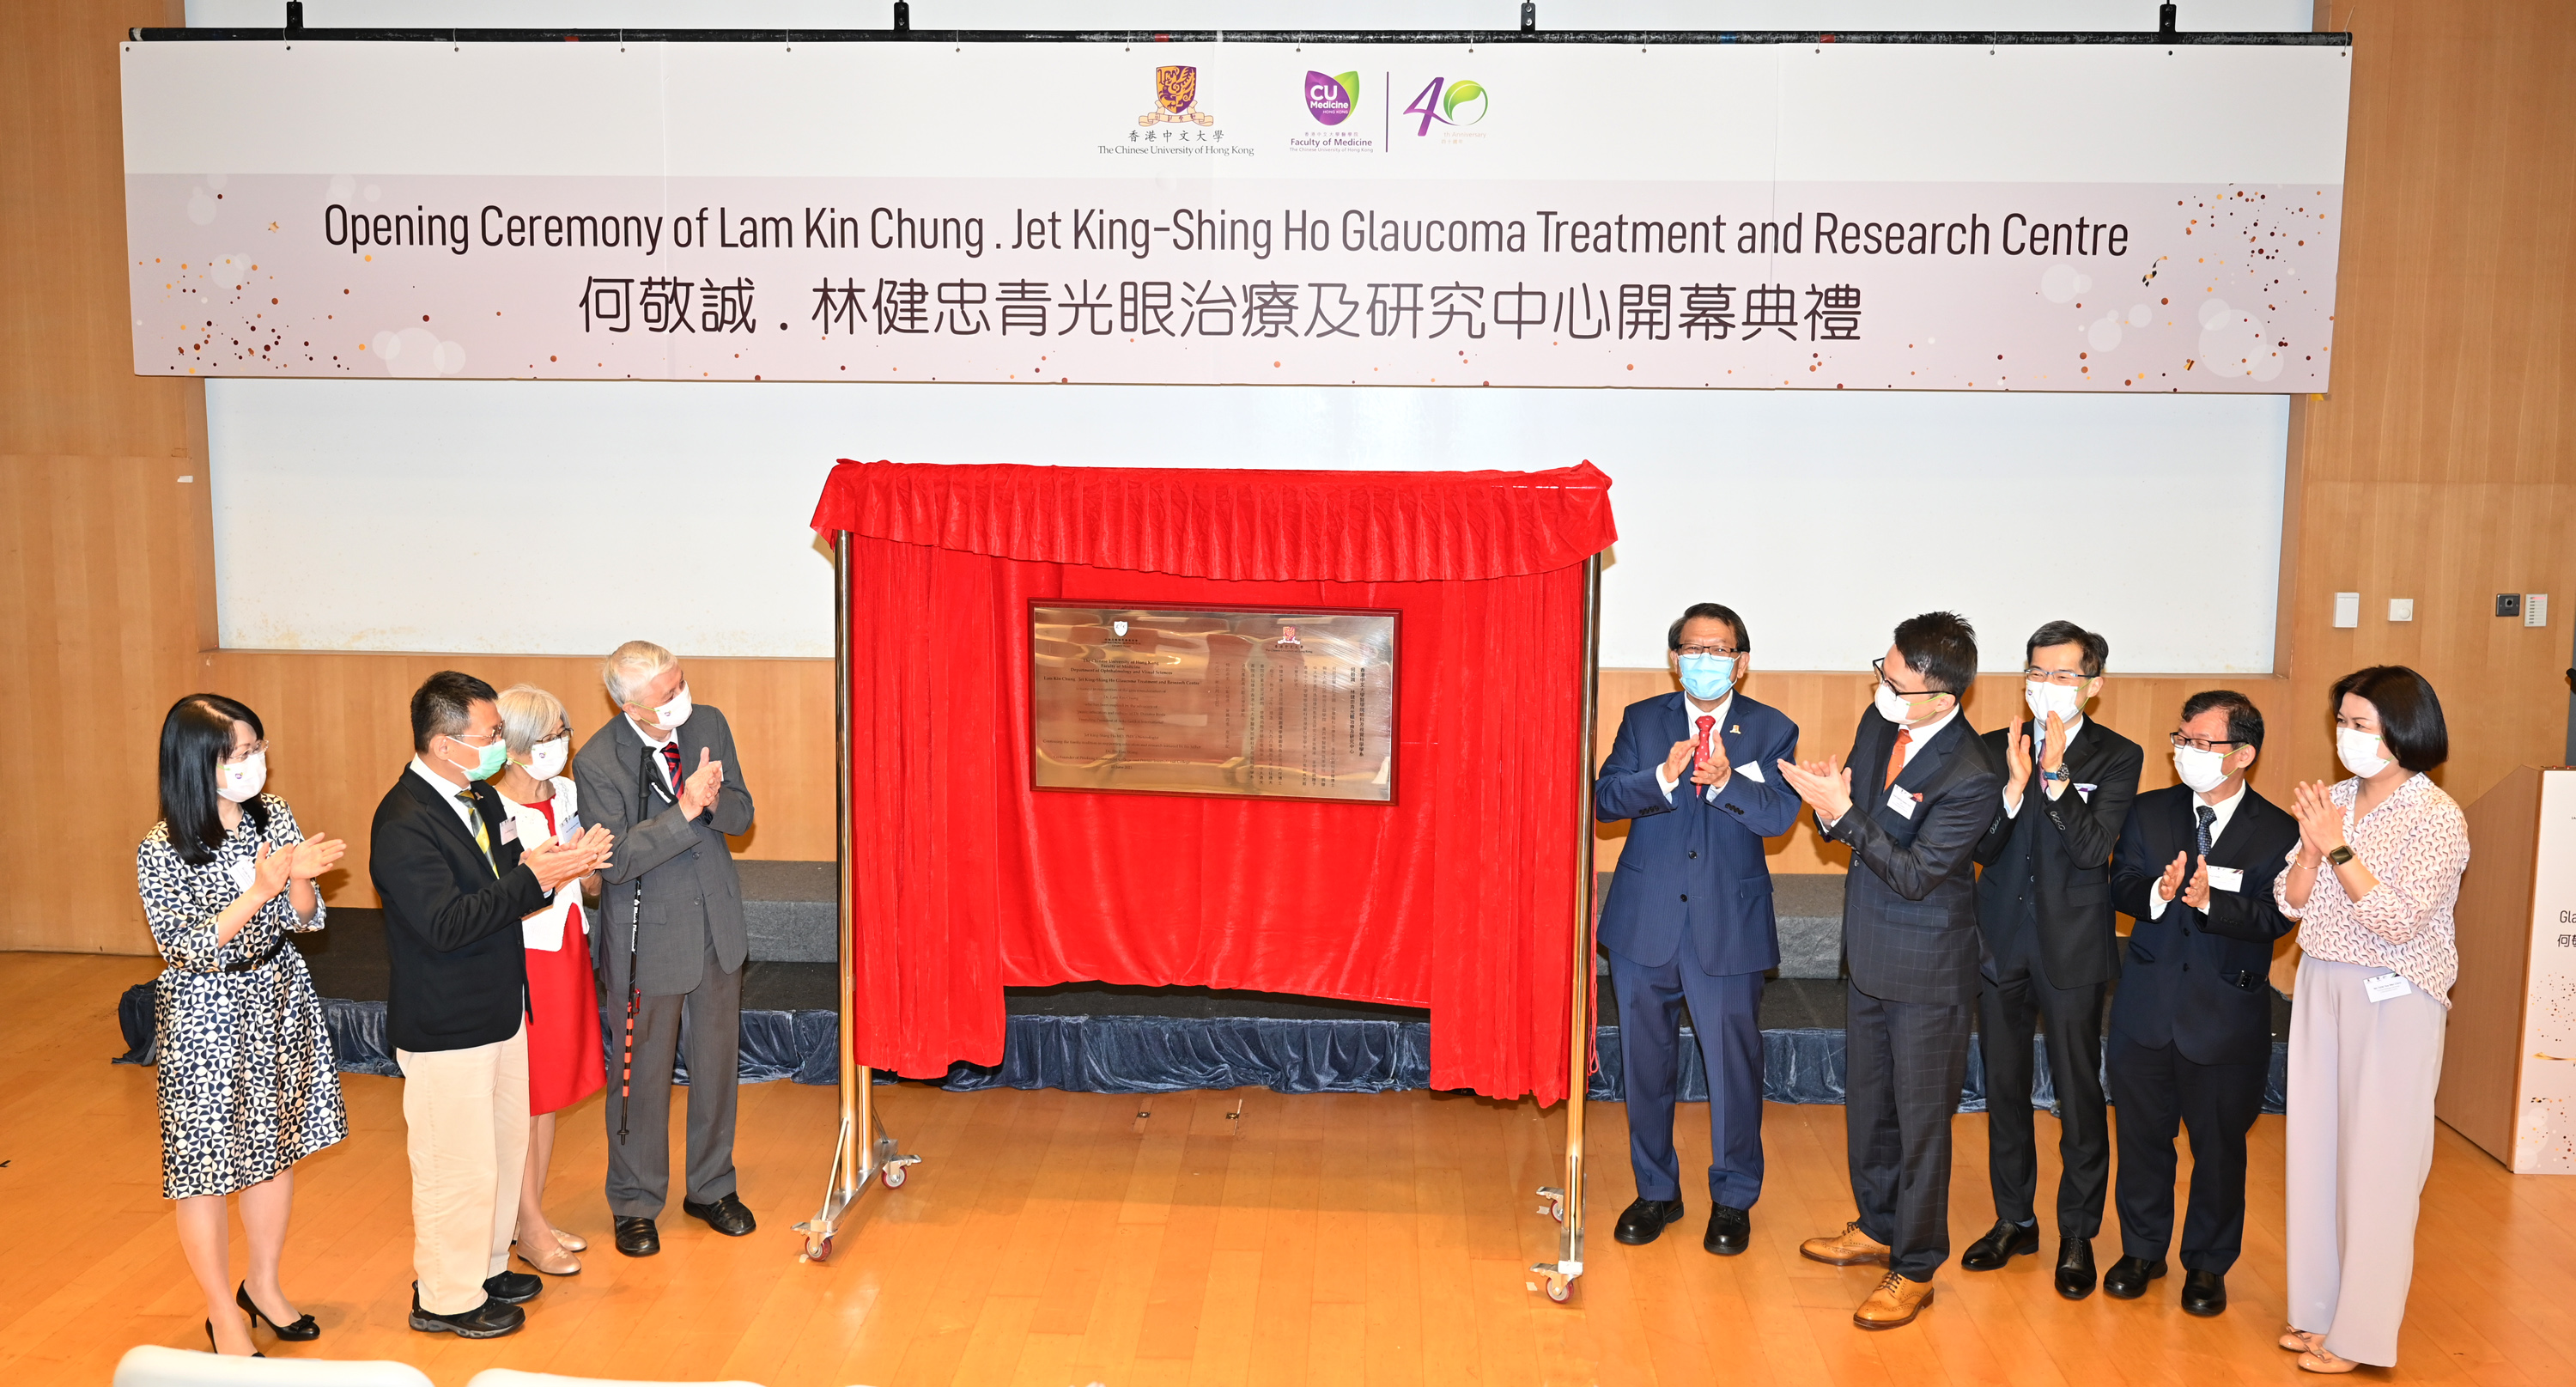 Lam Kin Chung . Jet King-Shing Ho Glaucoma Treatment and Research Centre Opening Ceremony